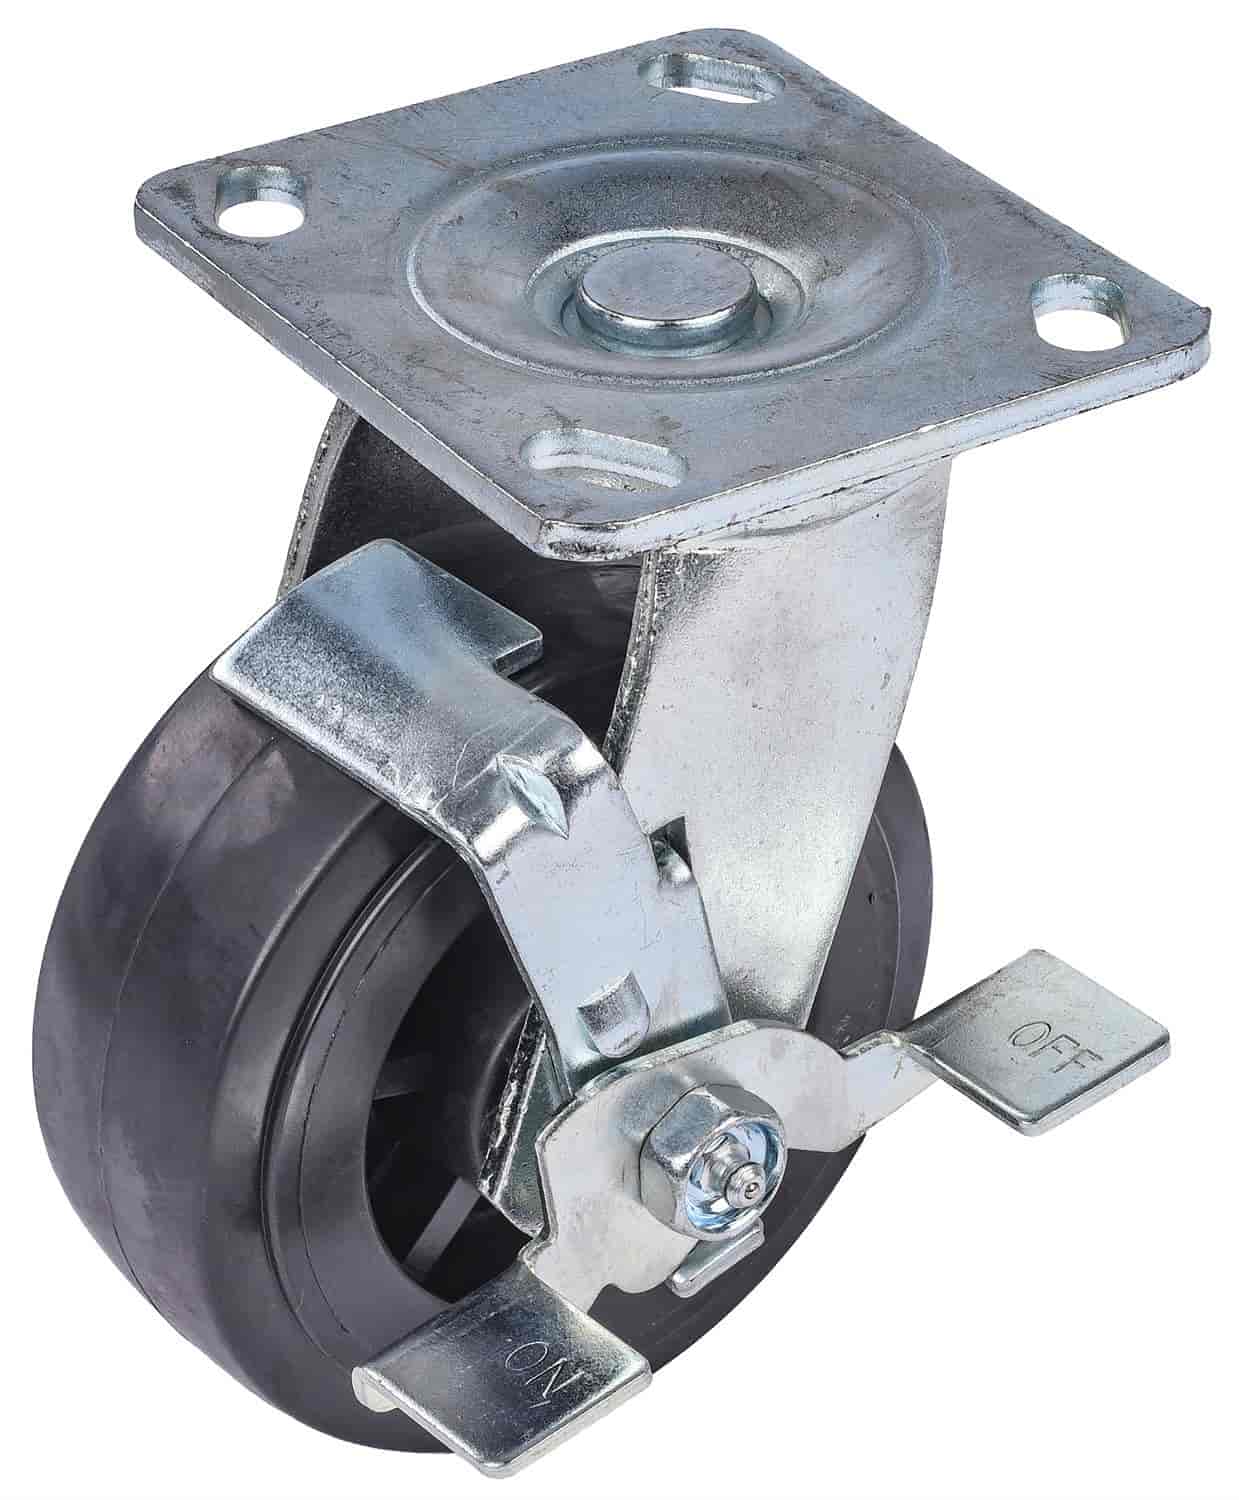 Replacement Caster for Auto Rotisserie 555-81241